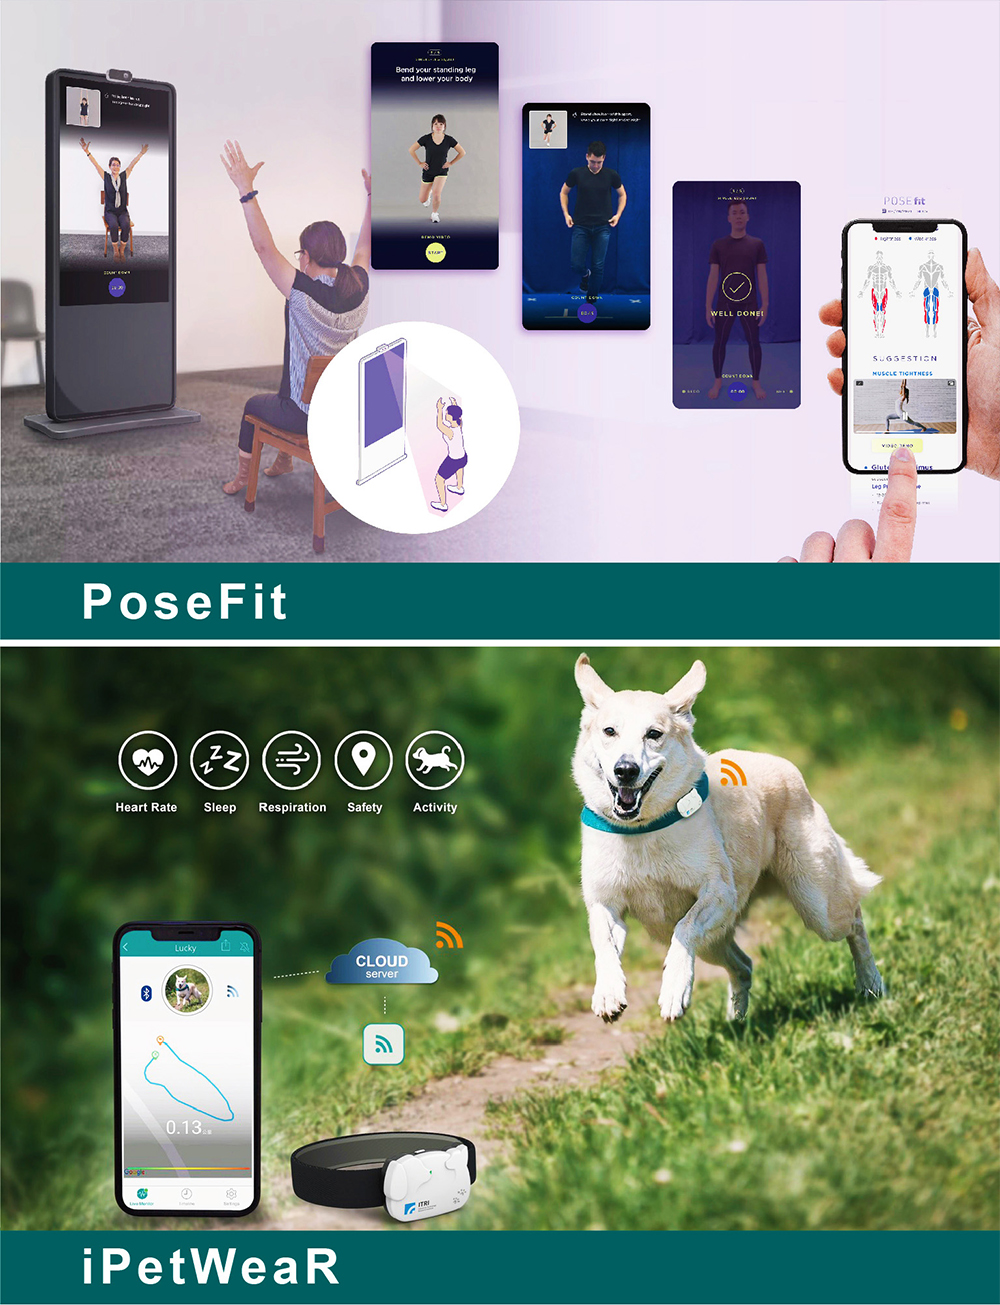 ITRI’s highlight health technologies featured PoseFit and iPetWeaR.